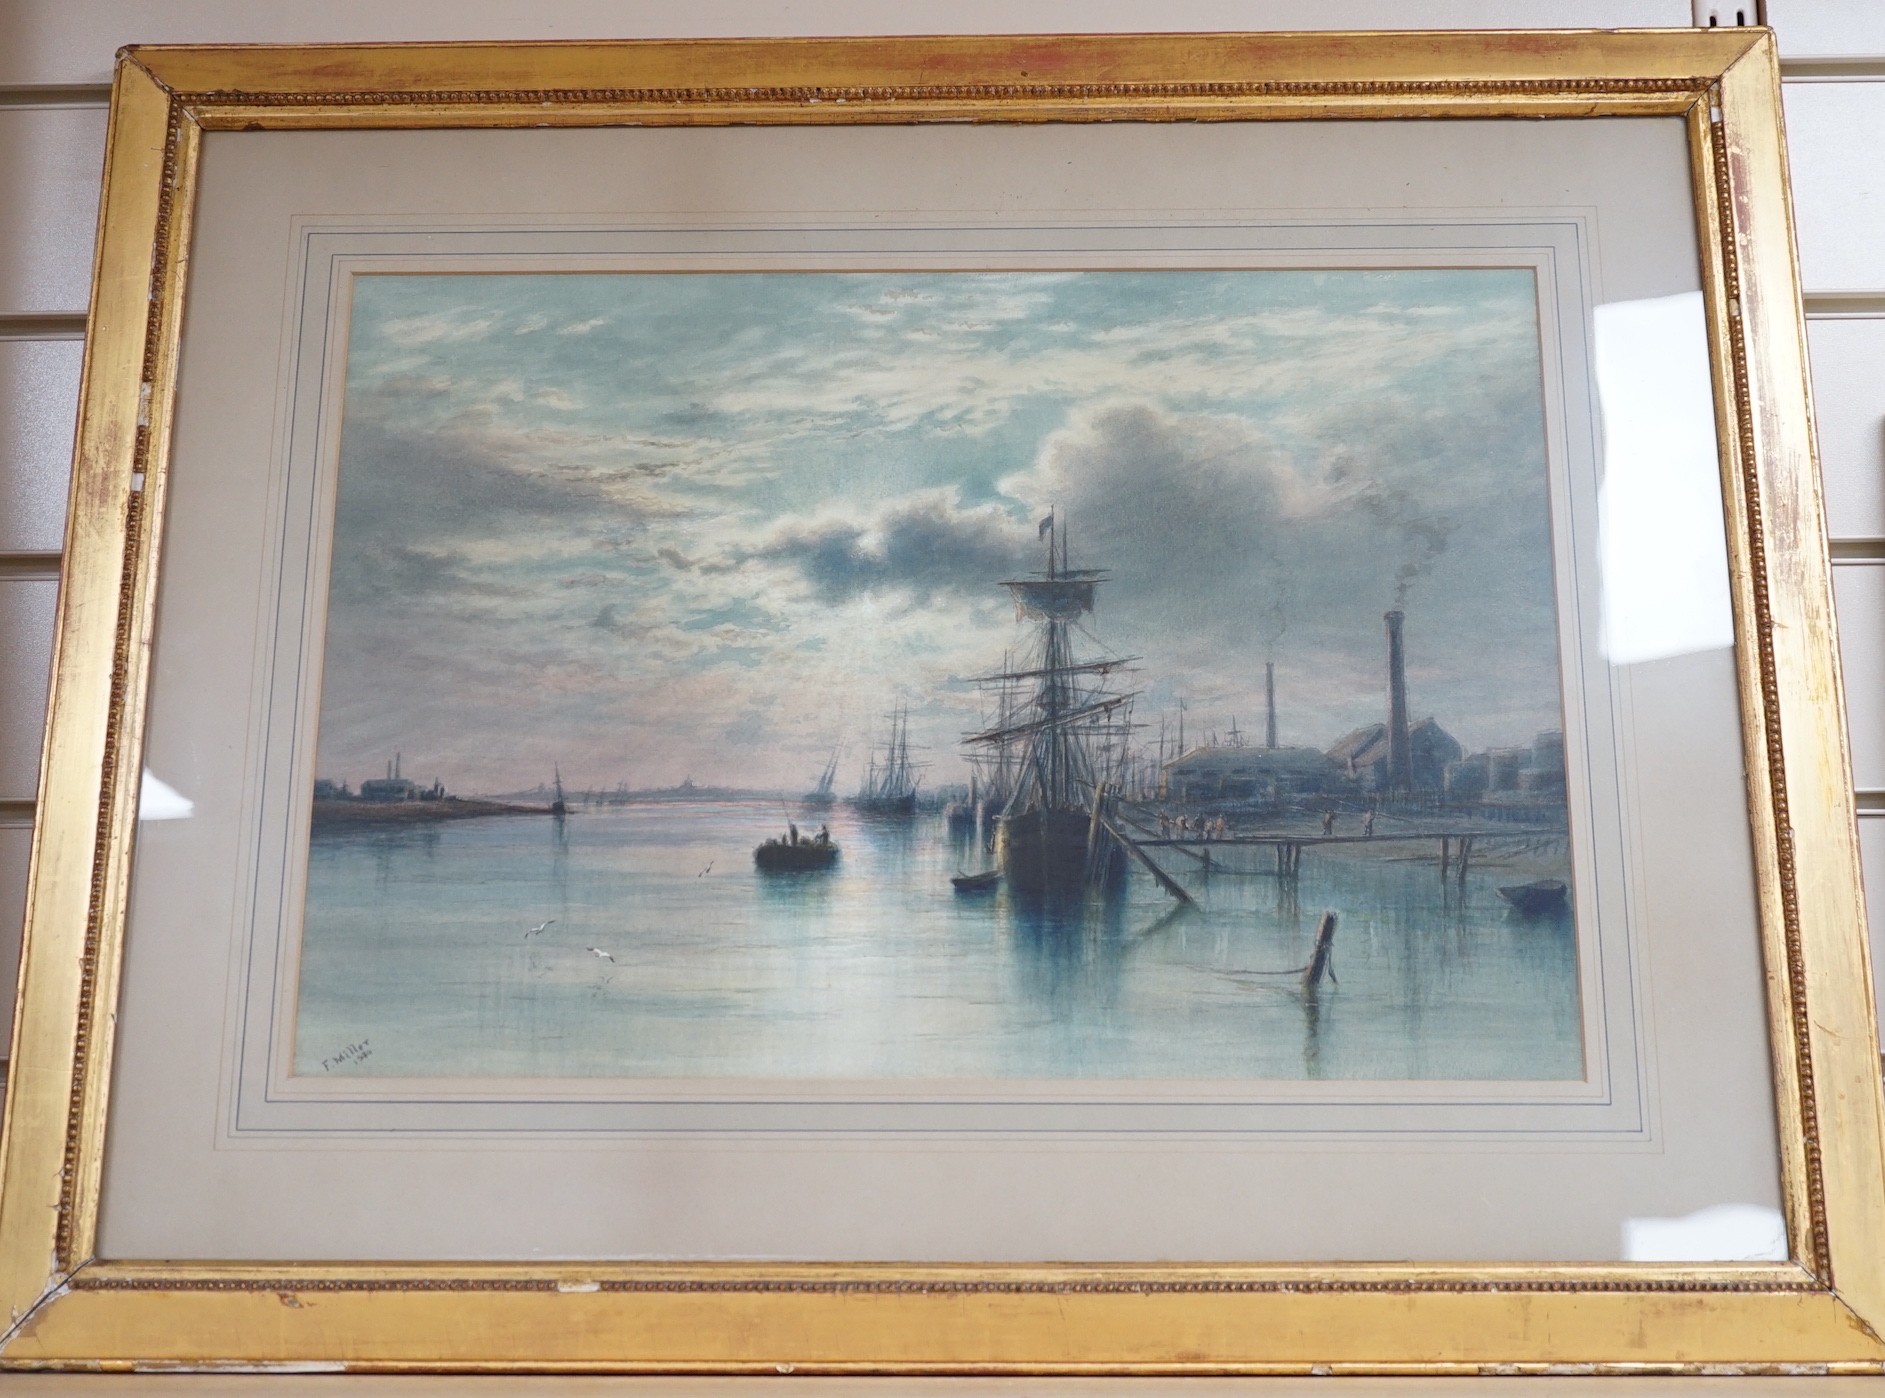 Frederick Miller (Exh c. 1880 - 1892), watercolour, Merchant ships moored in Shoreham harbour, signed and dated 1880, 32 x 46cm